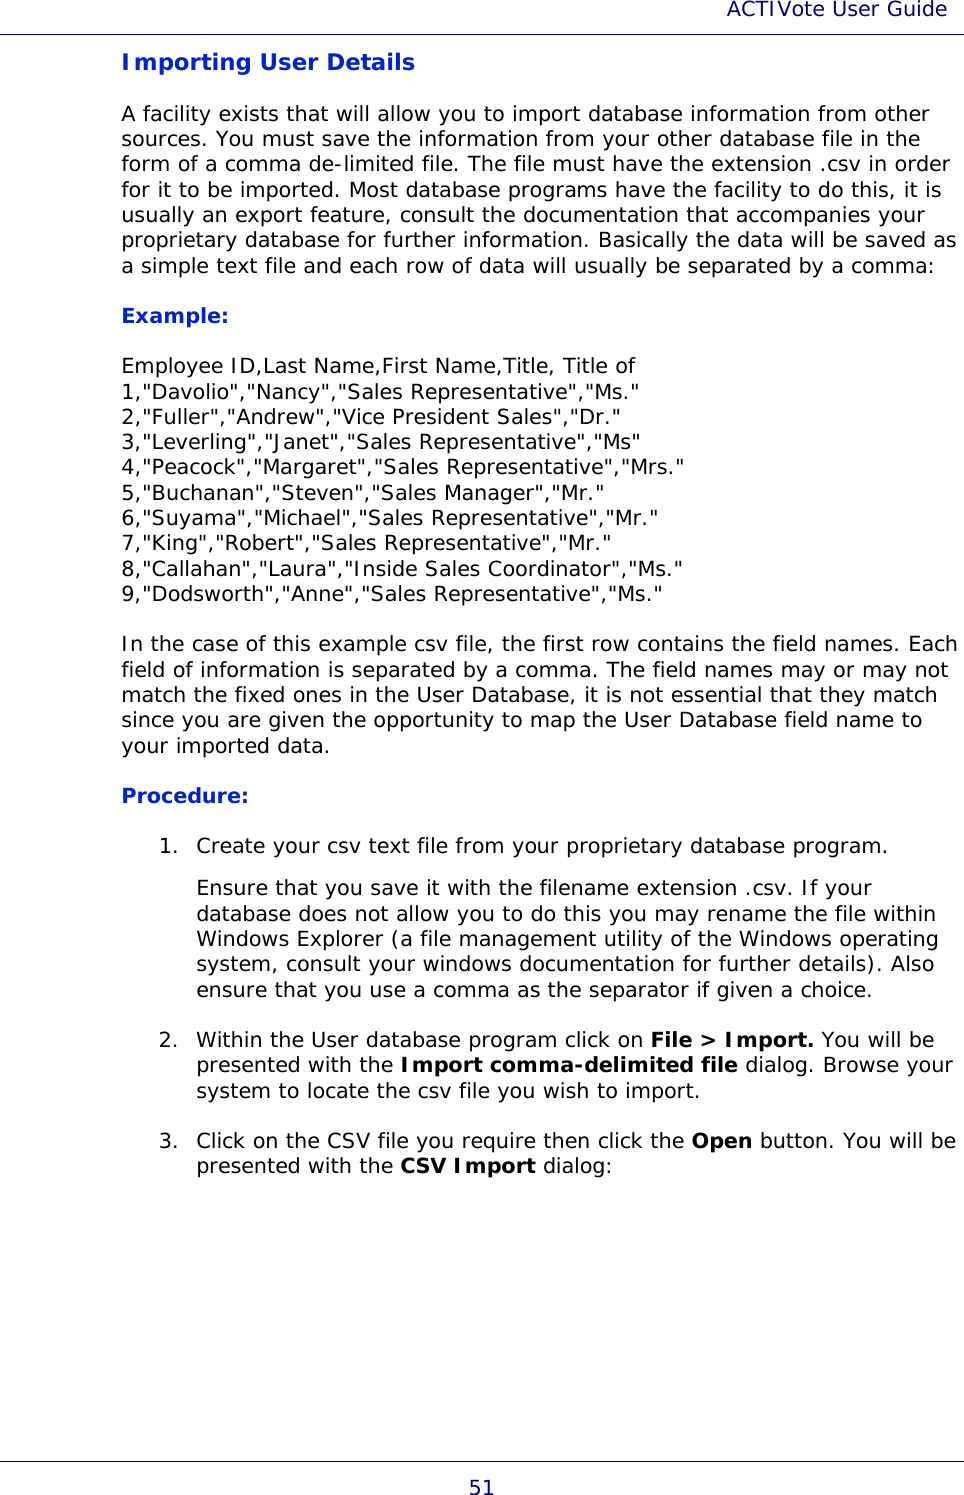 ACTIVote User Guide 51 Importing User Details A facility exists that will allow you to import database information from other sources. You must save the information from your other database file in the form of a comma de-limited file. The file must have the extension .csv in order for it to be imported. Most database programs have the facility to do this, it is usually an export feature, consult the documentation that accompanies your proprietary database for further information. Basically the data will be saved as a simple text file and each row of data will usually be separated by a comma: Example: Employee ID,Last Name,First Name,Title, Title of 1,&quot;Davolio&quot;,&quot;Nancy&quot;,&quot;Sales Representative&quot;,&quot;Ms.&quot; 2,&quot;Fuller&quot;,&quot;Andrew&quot;,&quot;Vice President Sales&quot;,&quot;Dr.&quot; 3,&quot;Leverling&quot;,&quot;Janet&quot;,&quot;Sales Representative&quot;,&quot;Ms&quot; 4,&quot;Peacock&quot;,&quot;Margaret&quot;,&quot;Sales Representative&quot;,&quot;Mrs.&quot; 5,&quot;Buchanan&quot;,&quot;Steven&quot;,&quot;Sales Manager&quot;,&quot;Mr.&quot; 6,&quot;Suyama&quot;,&quot;Michael&quot;,&quot;Sales Representative&quot;,&quot;Mr.&quot; 7,&quot;King&quot;,&quot;Robert&quot;,&quot;Sales Representative&quot;,&quot;Mr.&quot; 8,&quot;Callahan&quot;,&quot;Laura&quot;,&quot;Inside Sales Coordinator&quot;,&quot;Ms.&quot; 9,&quot;Dodsworth&quot;,&quot;Anne&quot;,&quot;Sales Representative&quot;,&quot;Ms.&quot; In the case of this example csv file, the first row contains the field names. Each field of information is separated by a comma. The field names may or may not match the fixed ones in the User Database, it is not essential that they match since you are given the opportunity to map the User Database field name to your imported data. Procedure: 1. Create your csv text file from your proprietary database program.  Ensure that you save it with the filename extension .csv. If your database does not allow you to do this you may rename the file within Windows Explorer (a file management utility of the Windows operating system, consult your windows documentation for further details). Also ensure that you use a comma as the separator if given a choice. 2. Within the User database program click on File &gt; Import. You will be presented with the Import comma-delimited file dialog. Browse your system to locate the csv file you wish to import. 3. Click on the CSV file you require then click the Open button. You will be presented with the CSV Import dialog: 